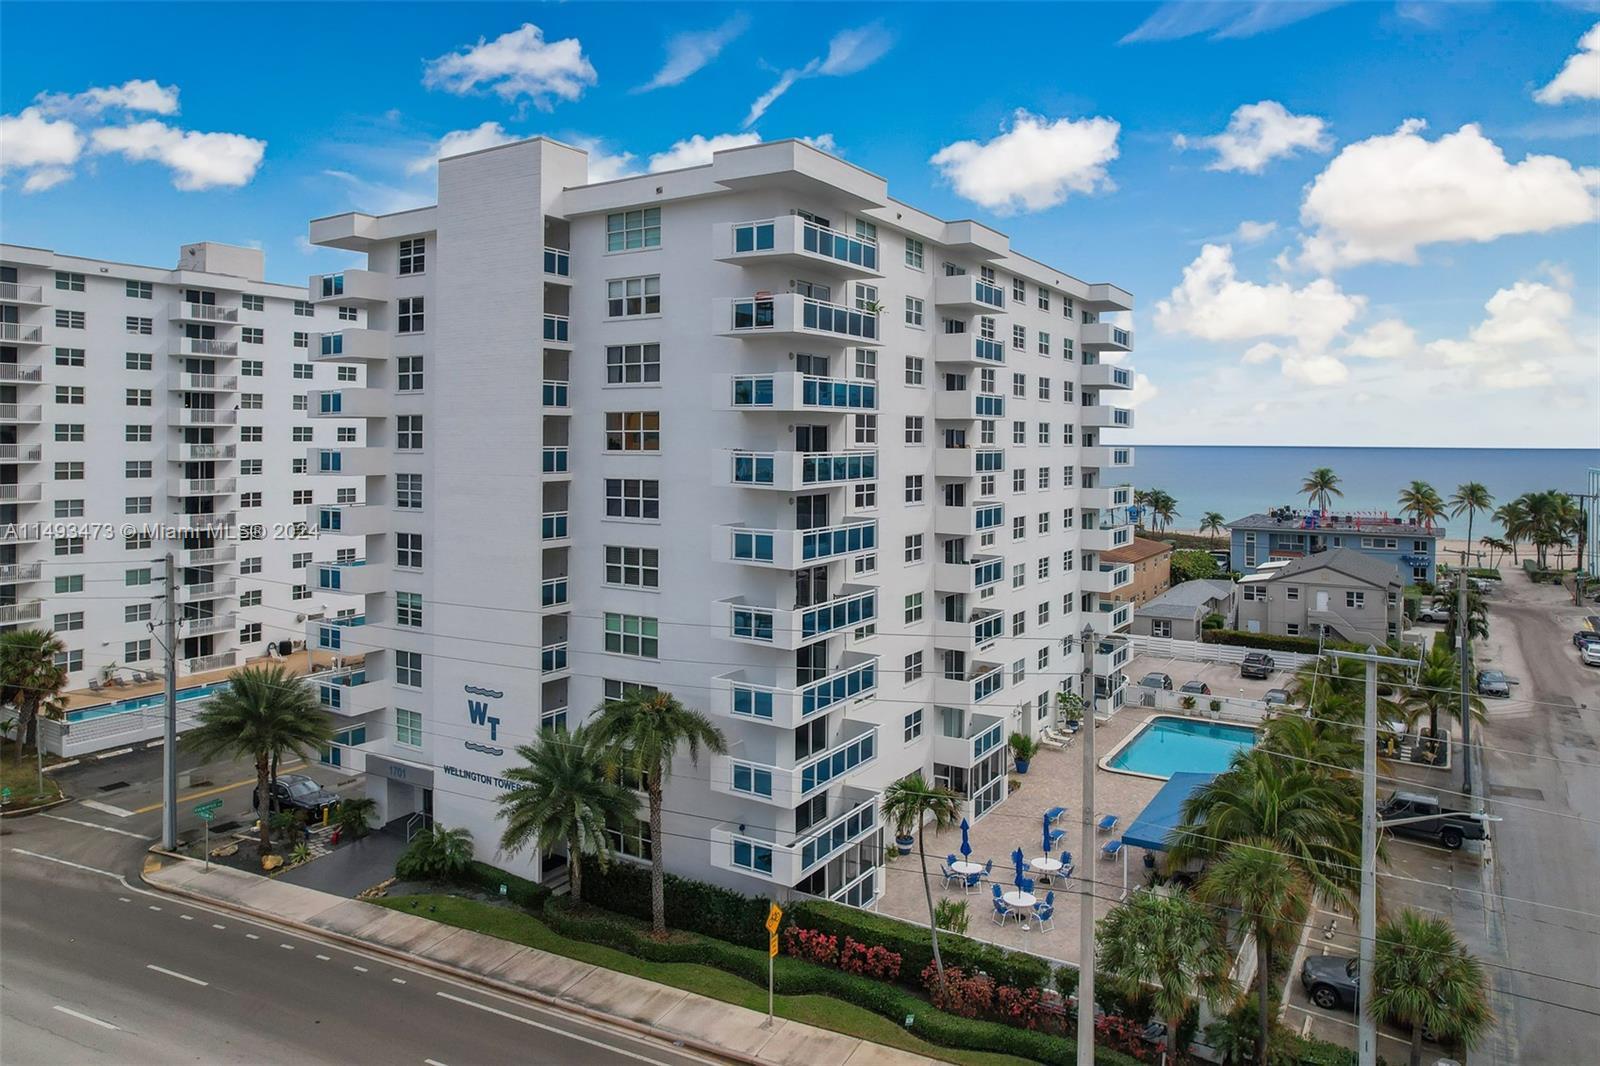 Photo of 1701 S Ocean Dr #203 in Hollywood, FL